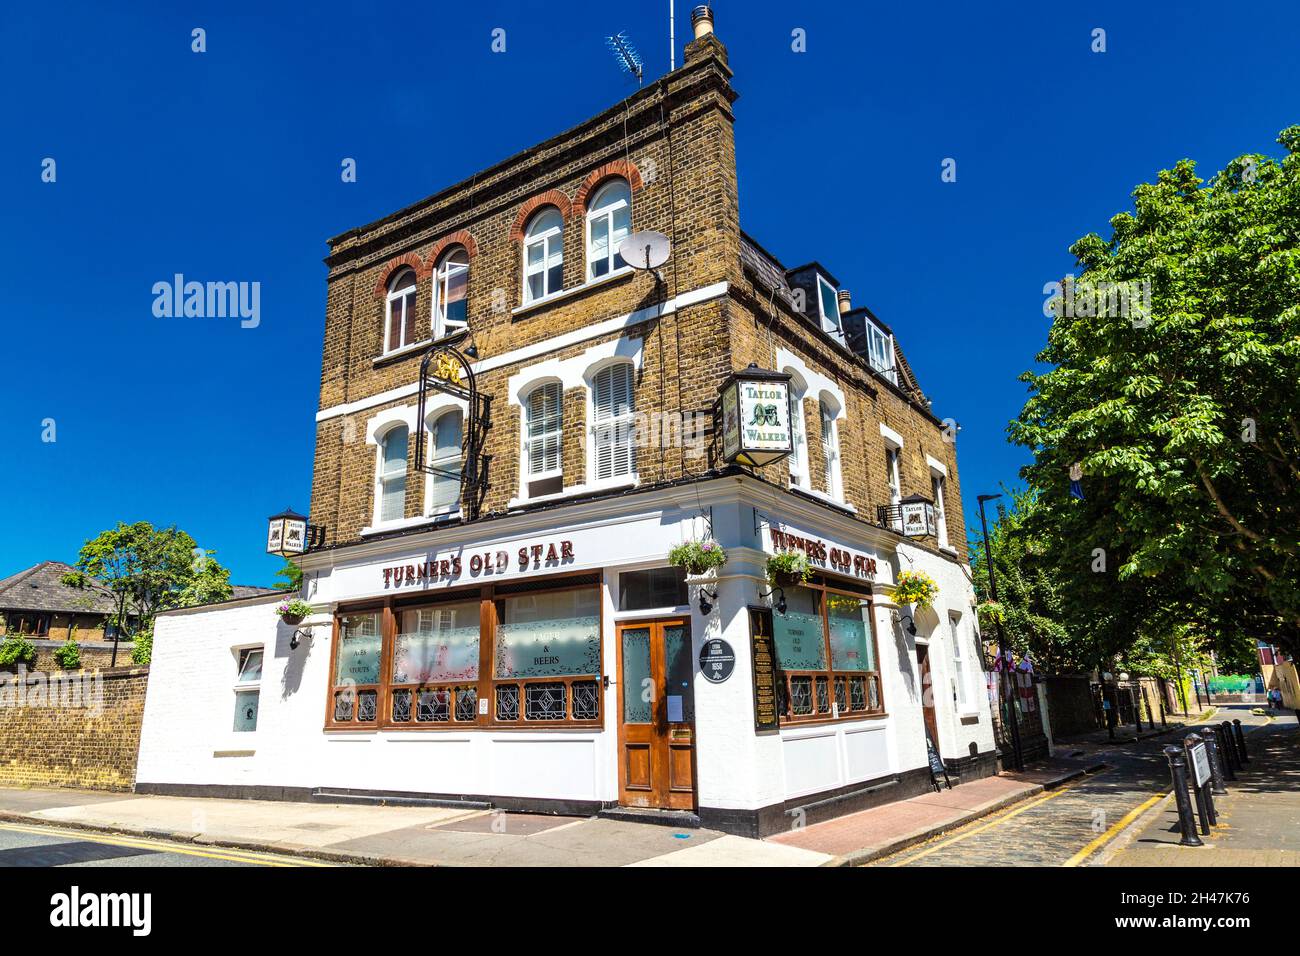 Exterior of The Turners Old Star pub in Wapping, London, UK Stock Photo